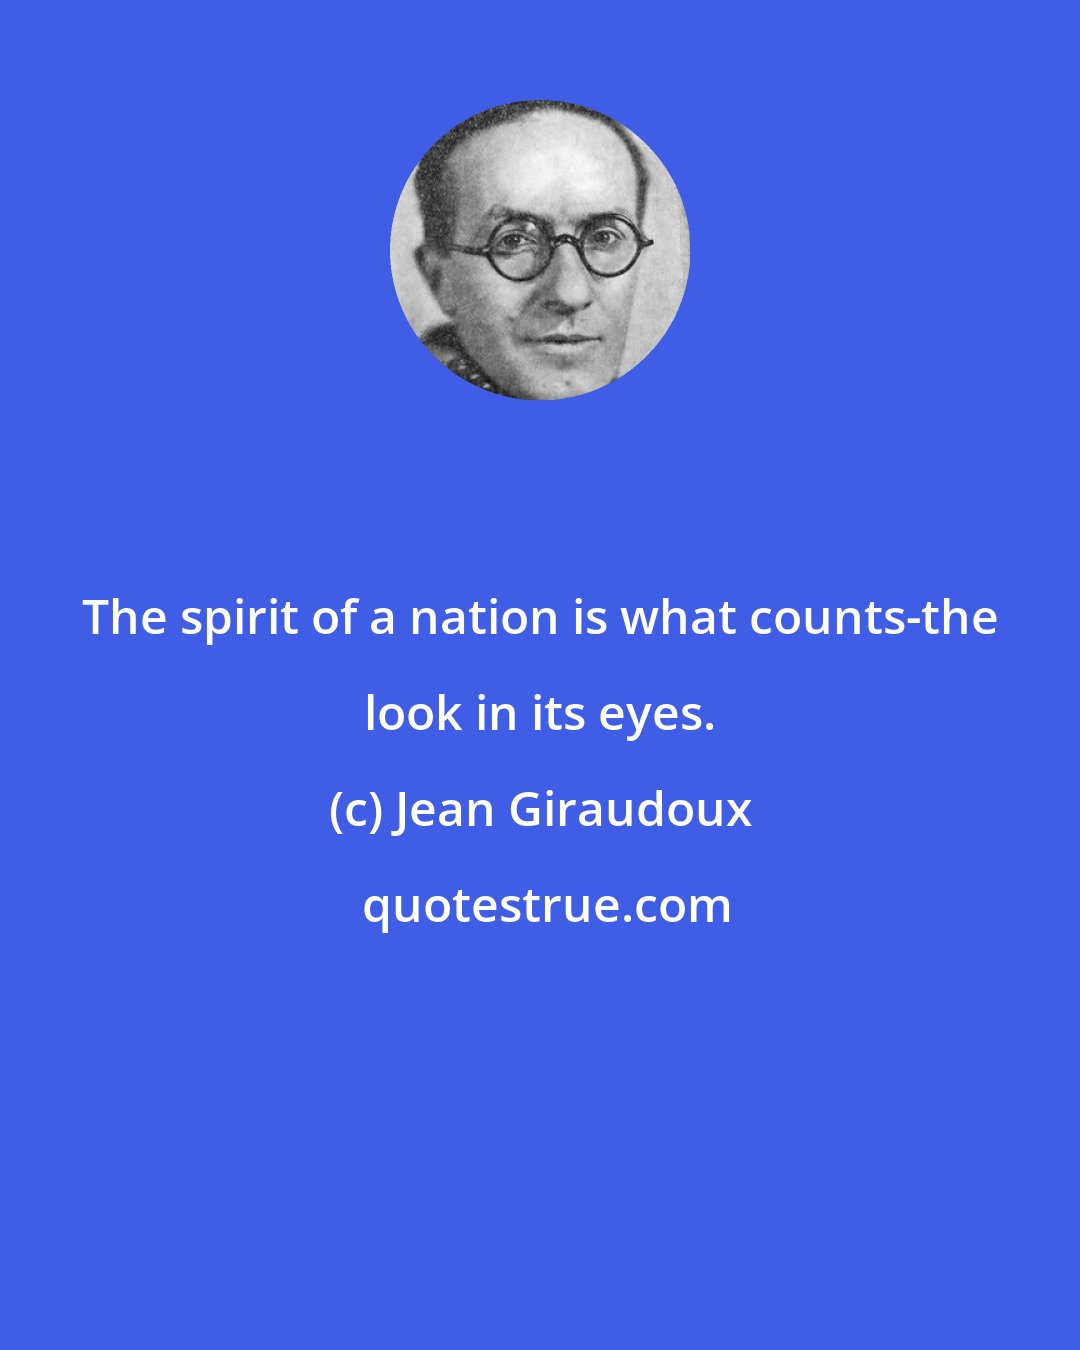 Jean Giraudoux: The spirit of a nation is what counts-the look in its eyes.